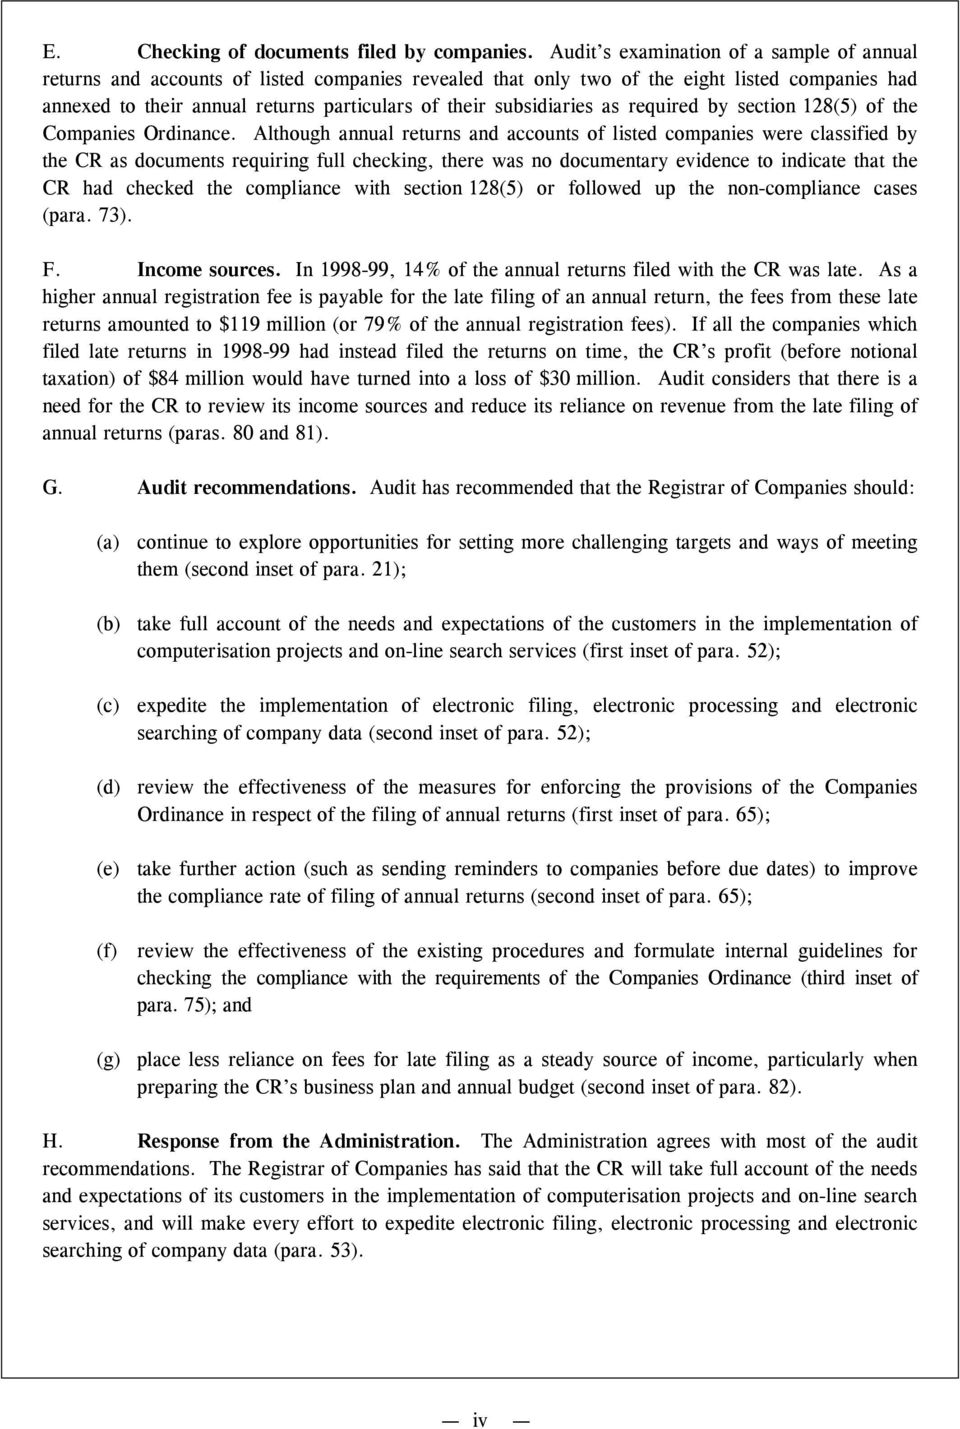 subsidiaries as required by section 128(5) of the Companies Ordinance.